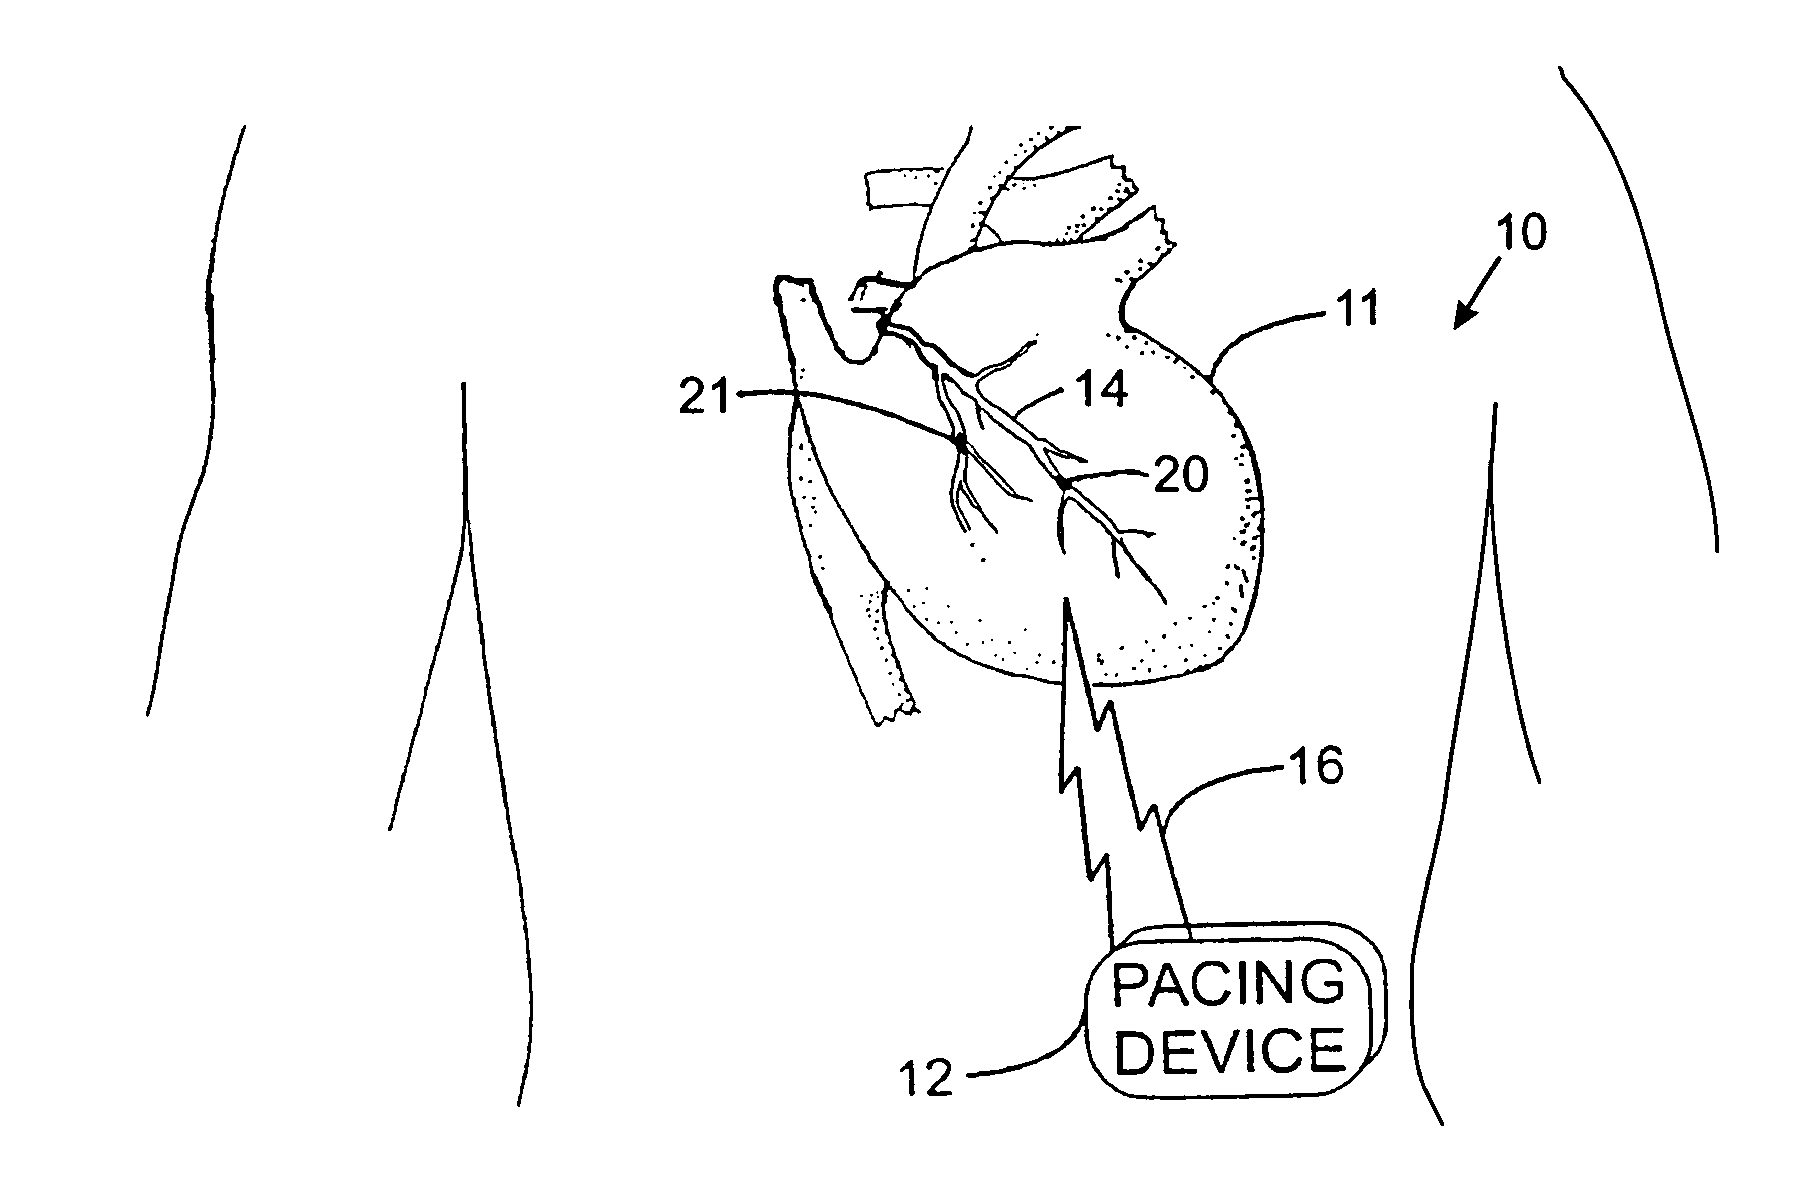 Implantable medical apparatus having an omnidirectional antenna for receiving radio frequency signals